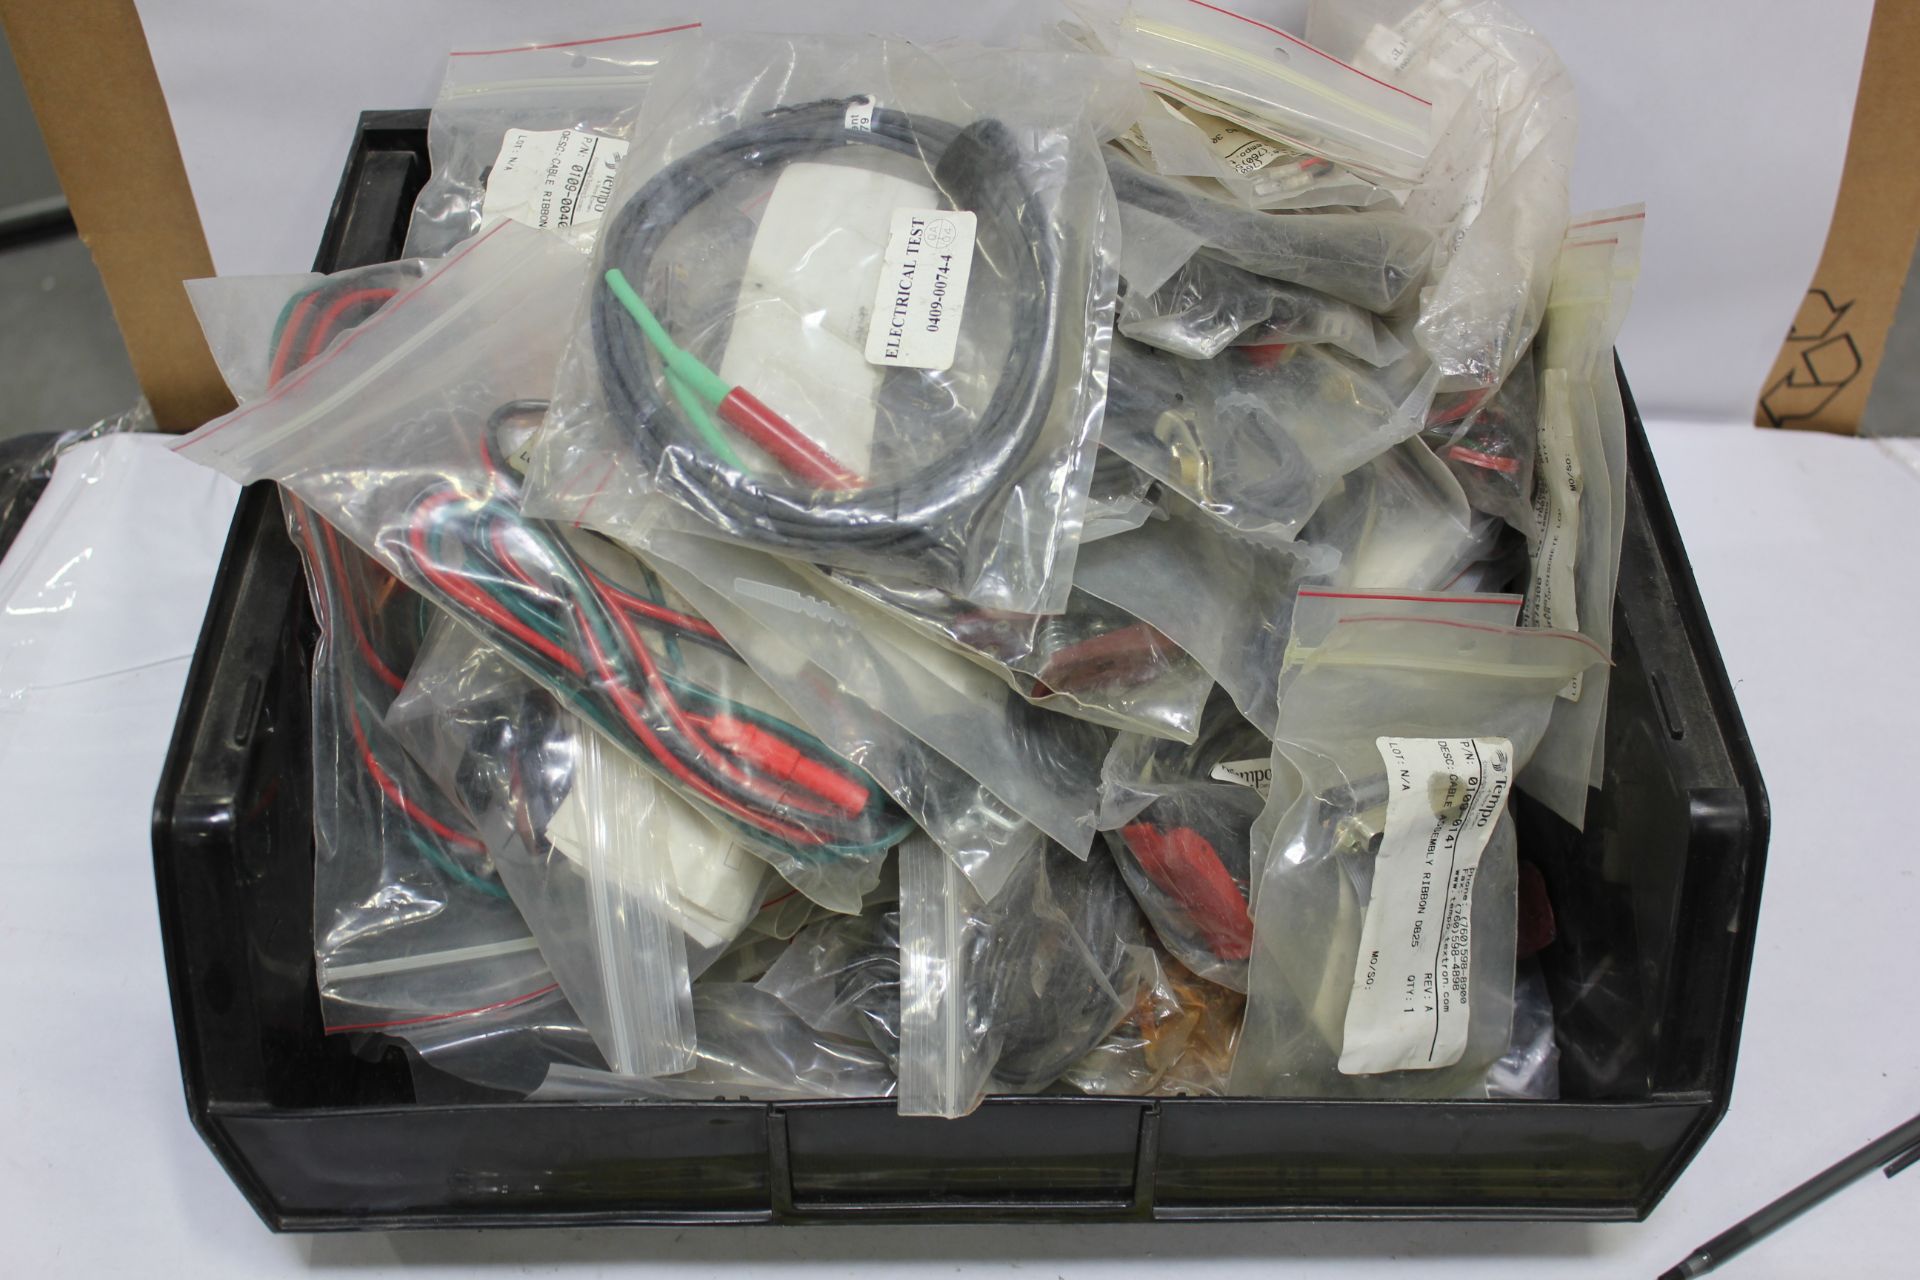 LOT OF CONNECTORS, PLUGS, CABLES